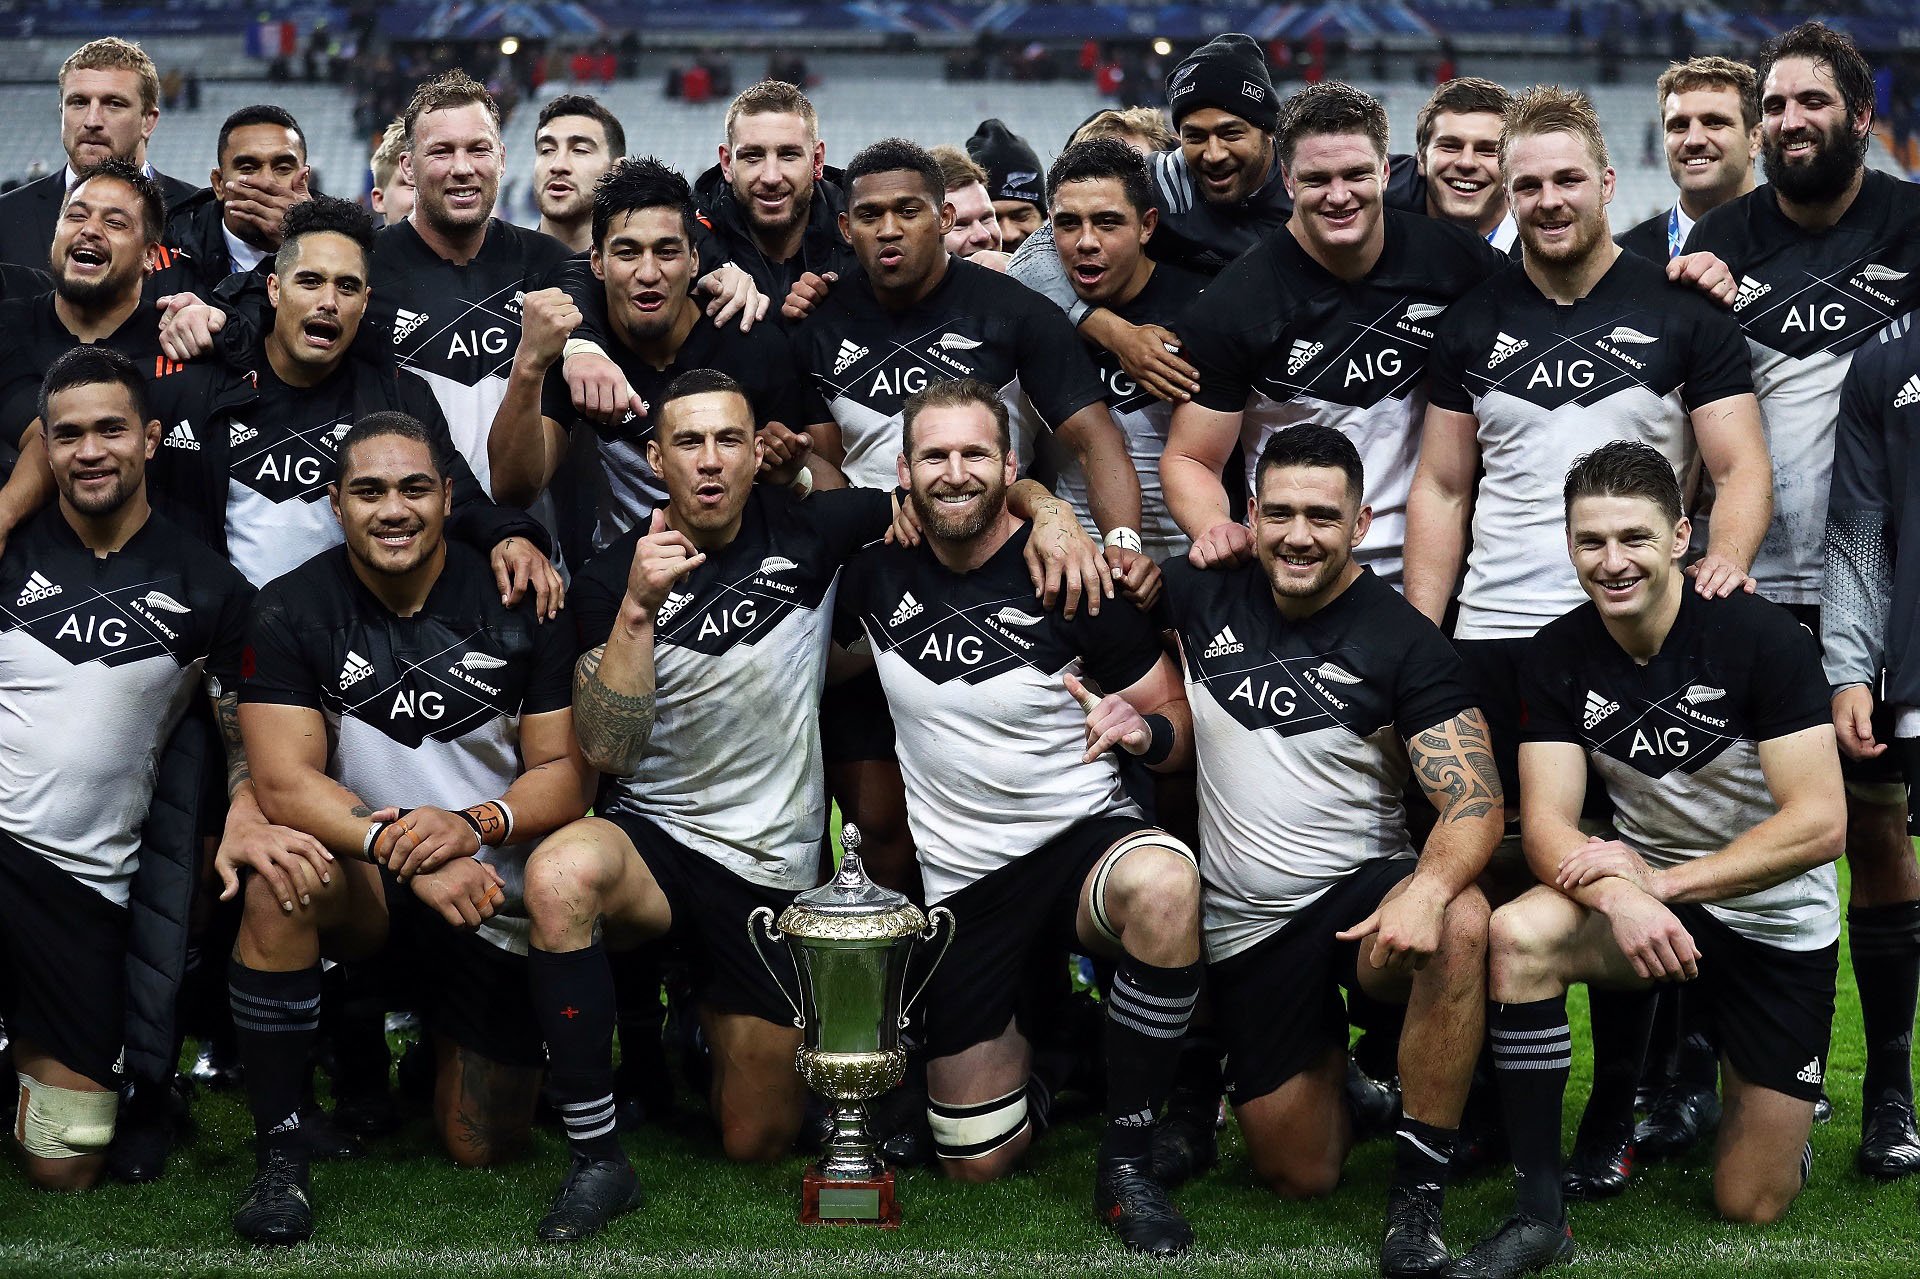 Make or break: A look at the first All Blacks squad of 2018